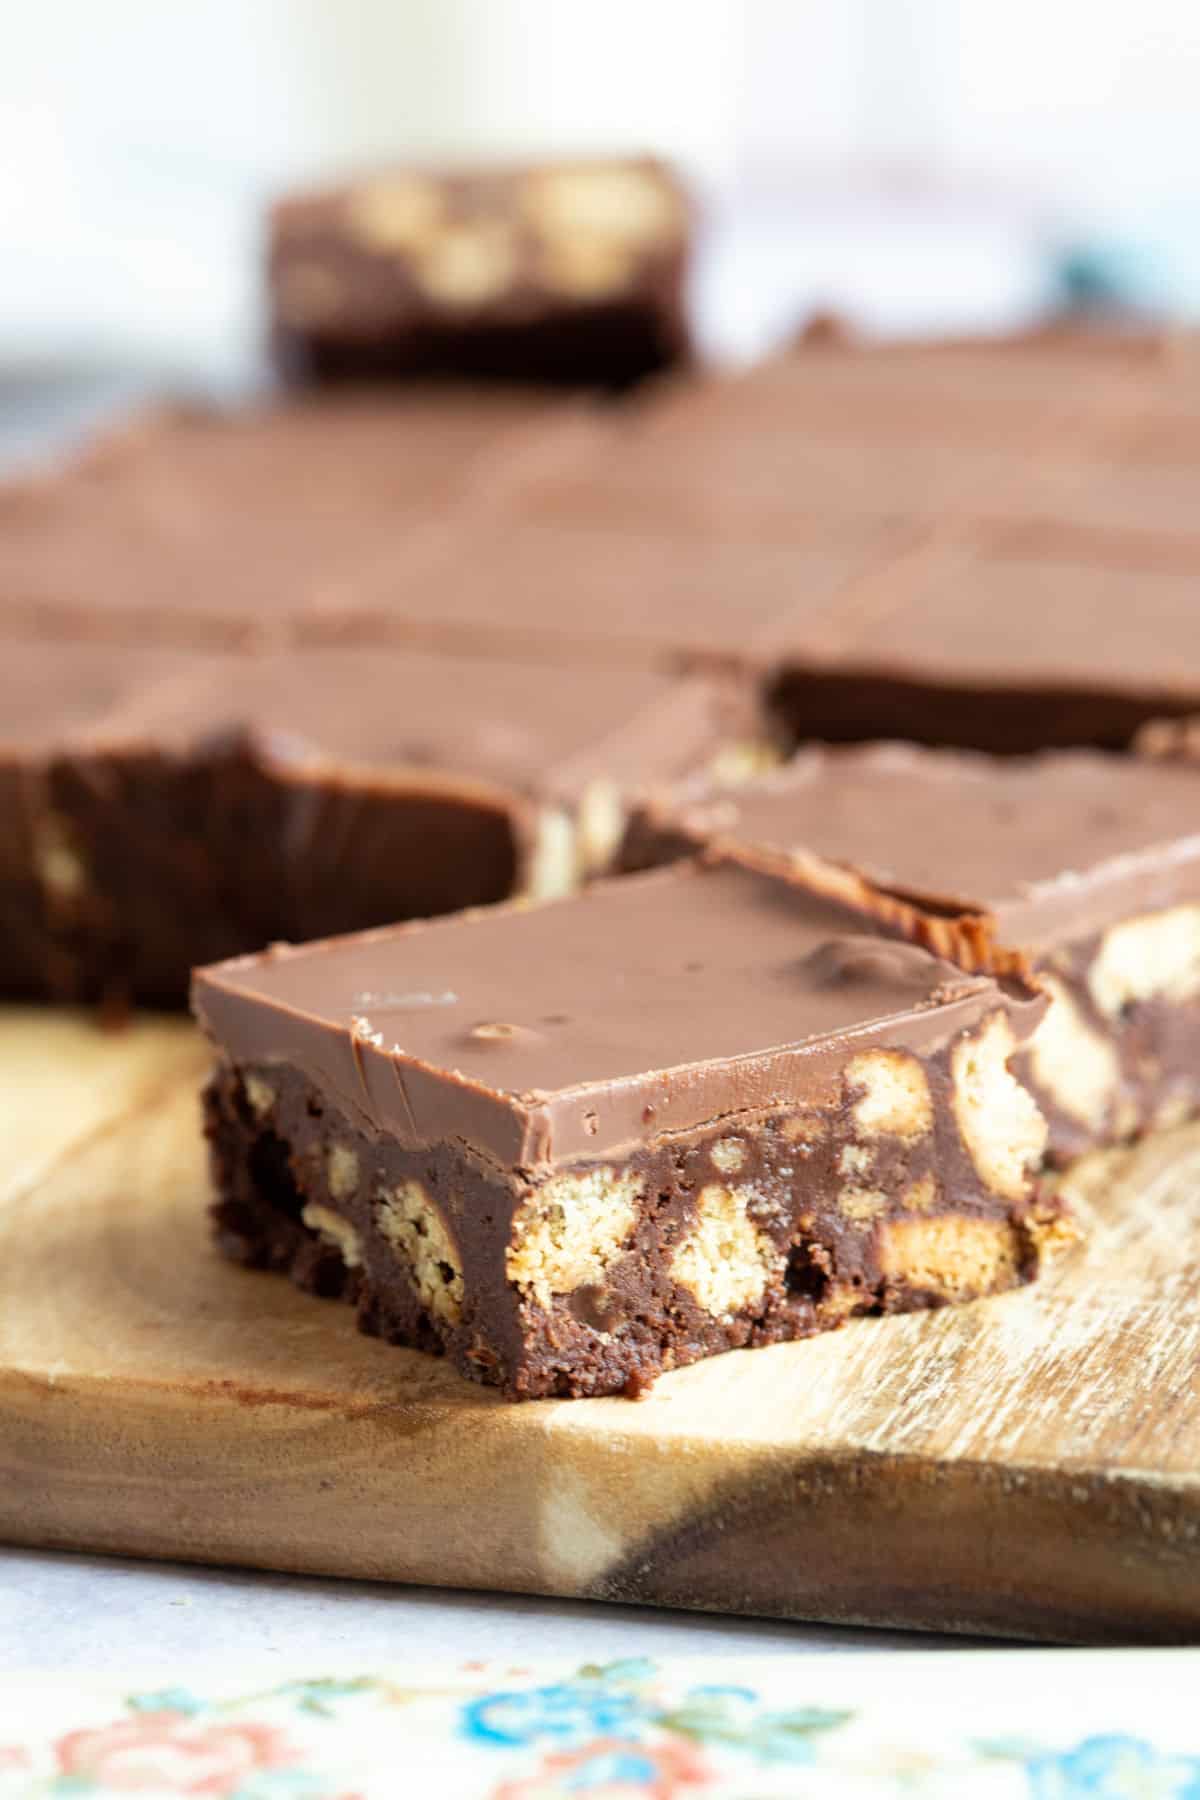 A slice of chocolate tiffin.